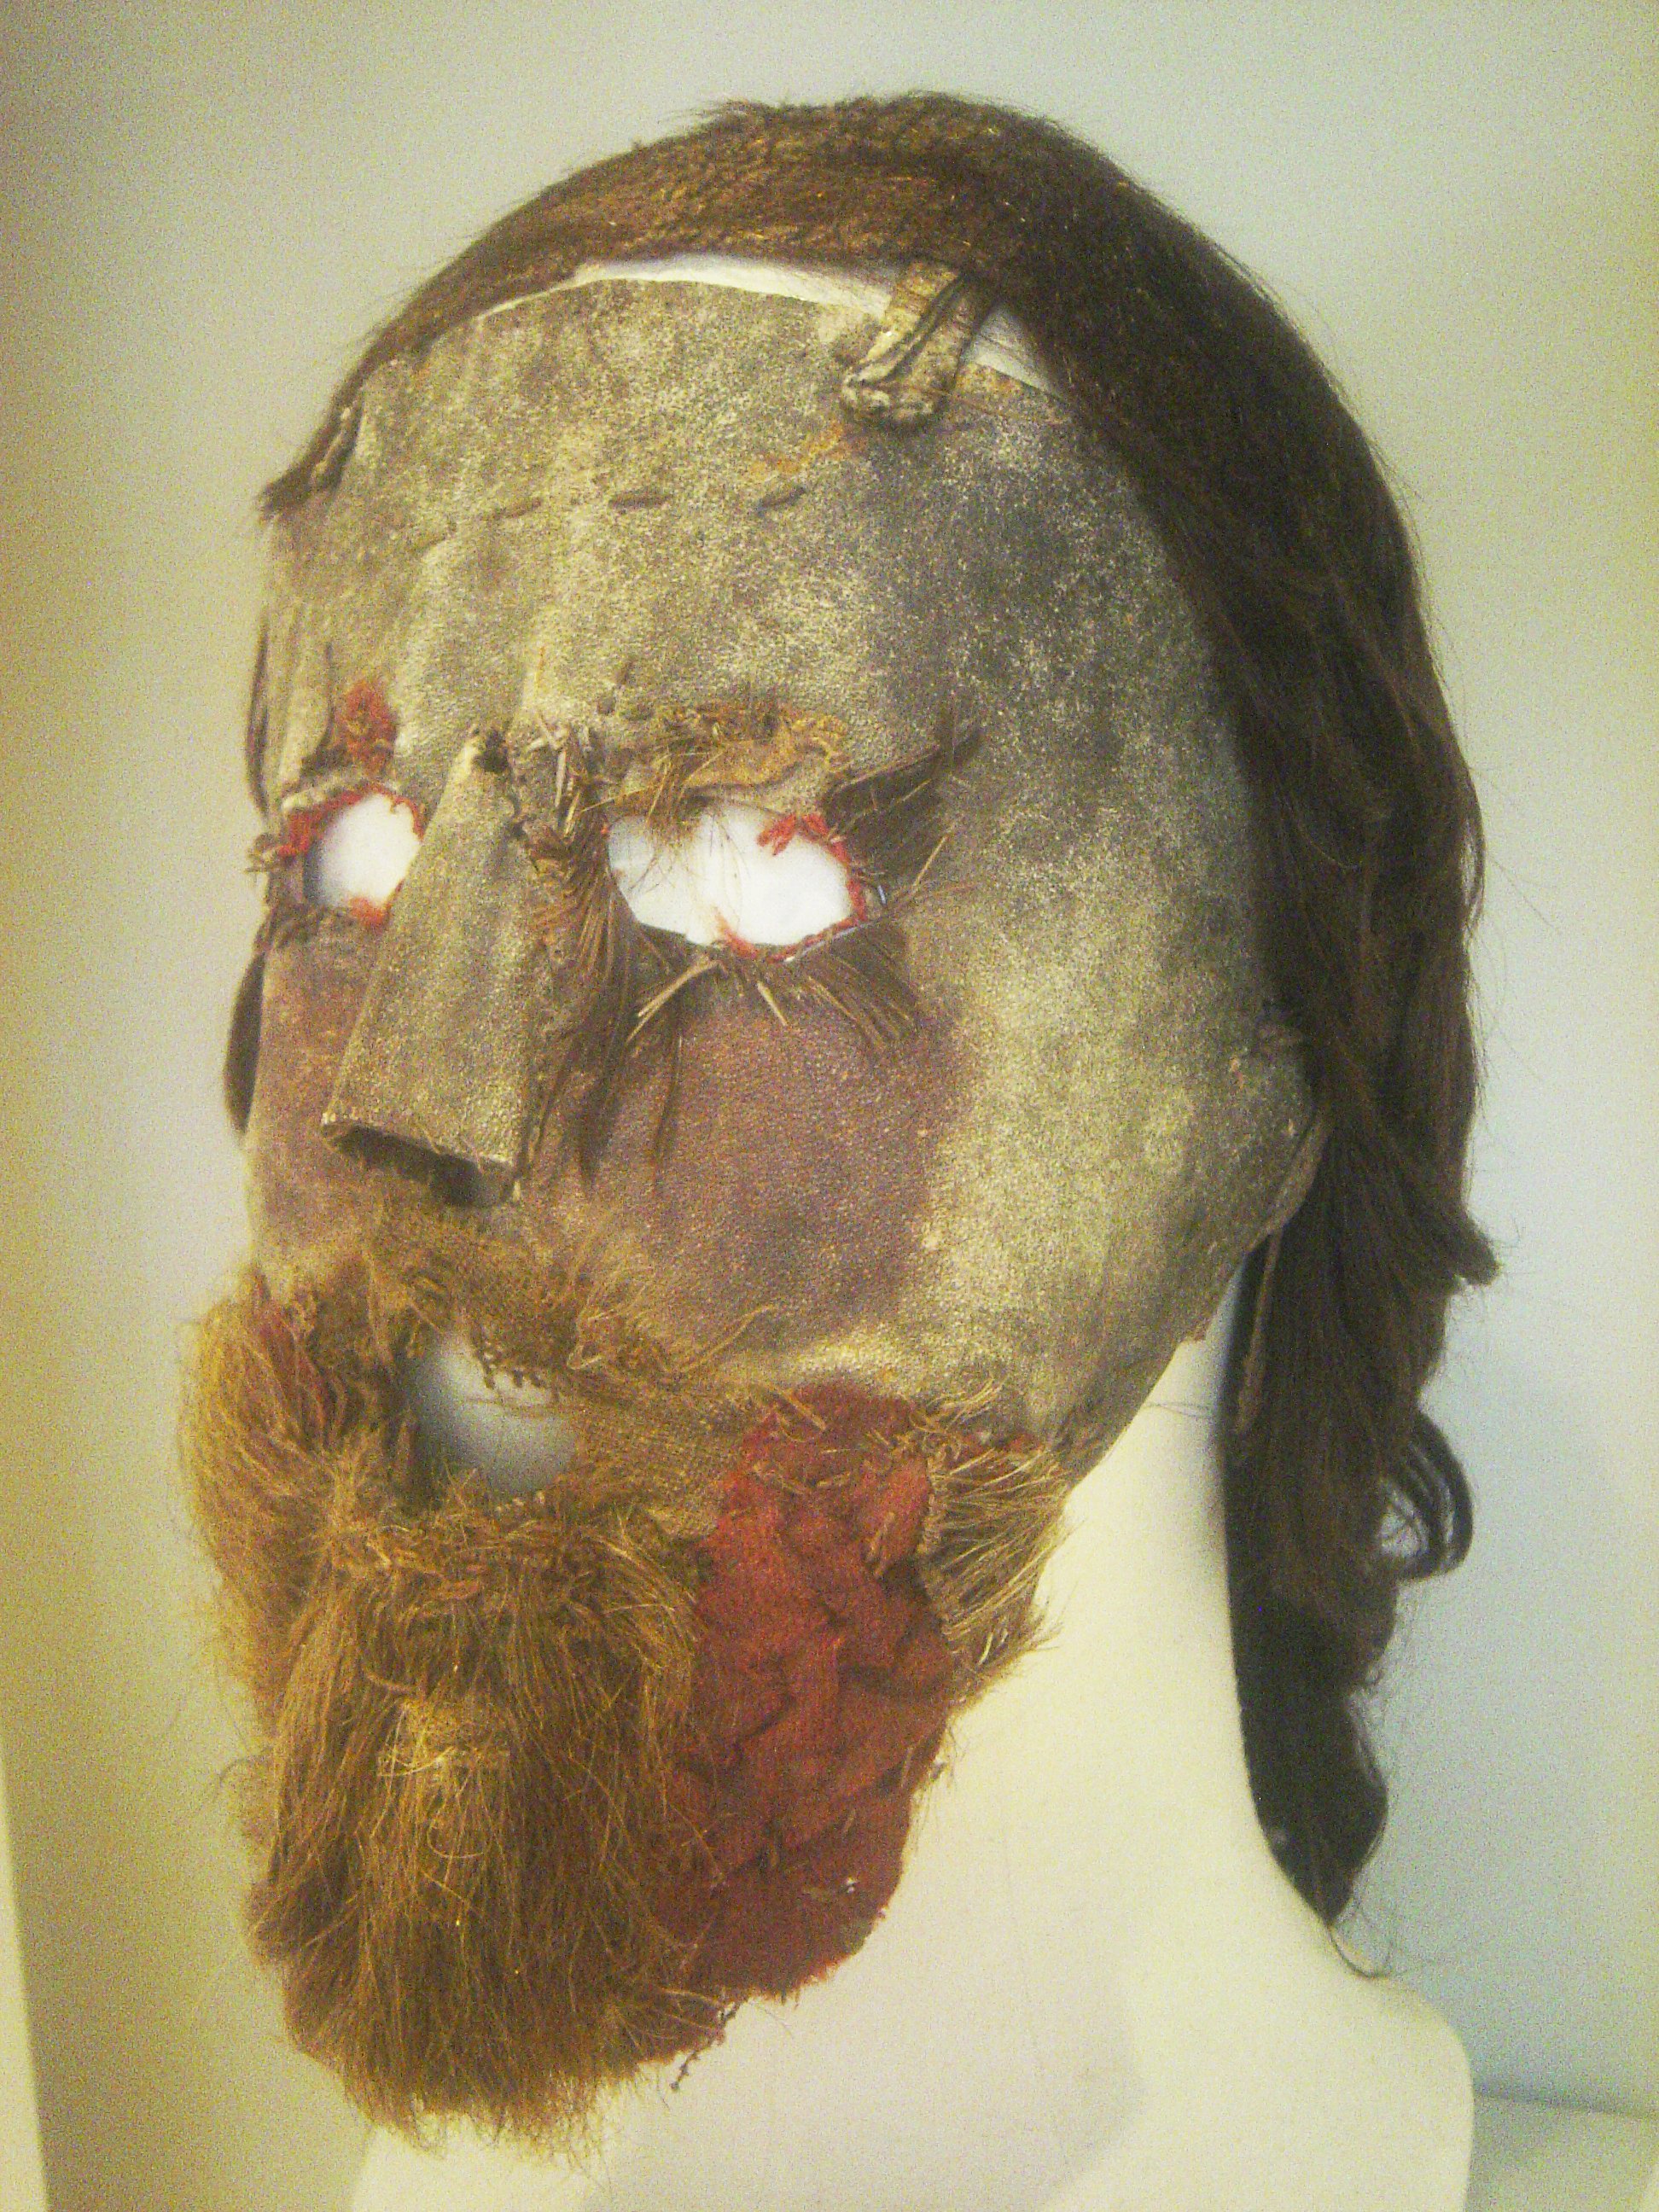 Alexander Peden's Mask,n 1663, this Presbyterian minister used this mask to hide himself from the Scottish government, who did not approve of his beliefs